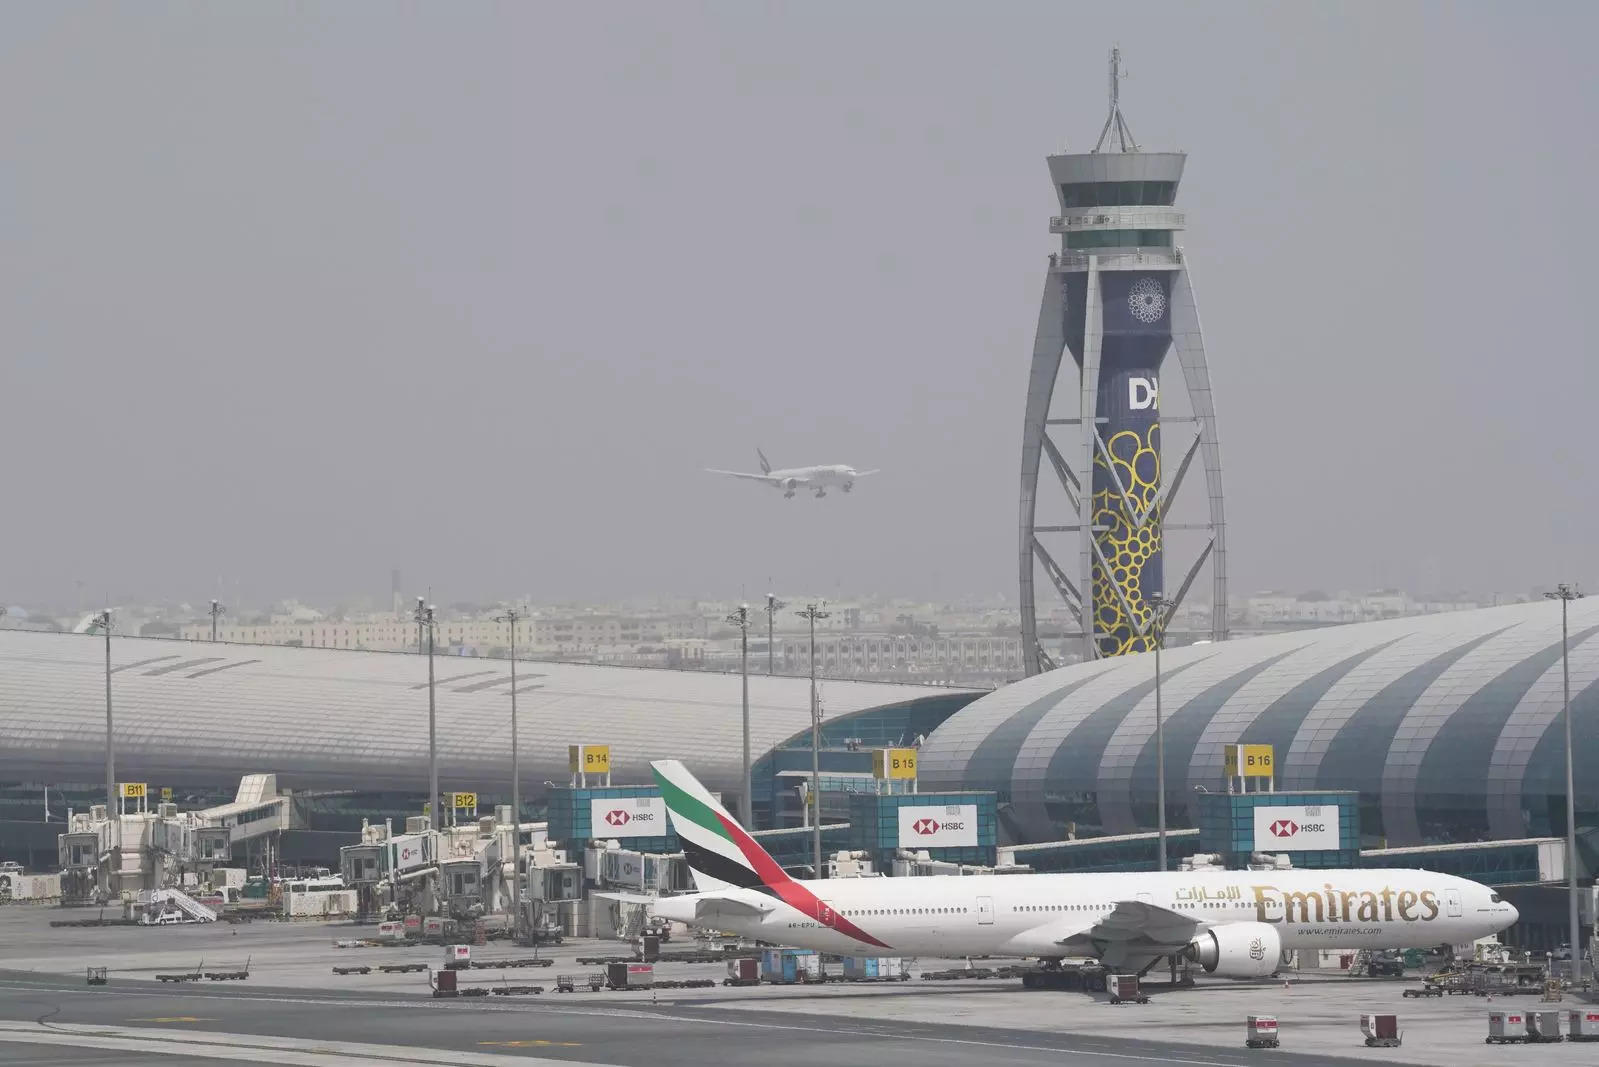 Dubai airport expects pre-pandemic monthly passenger volumes by end of 2023